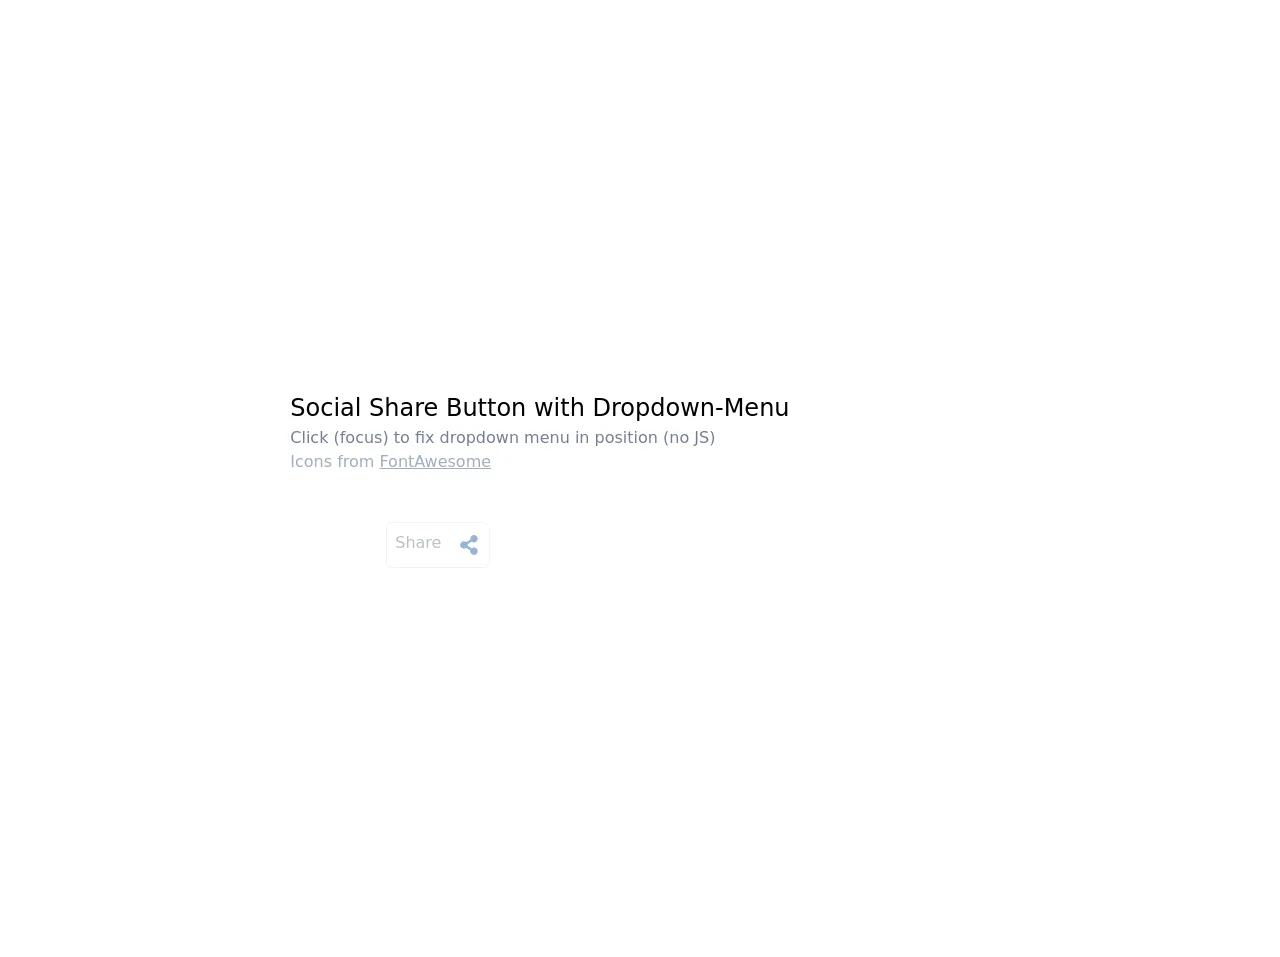 Social Share Button with Dropdown-Menu